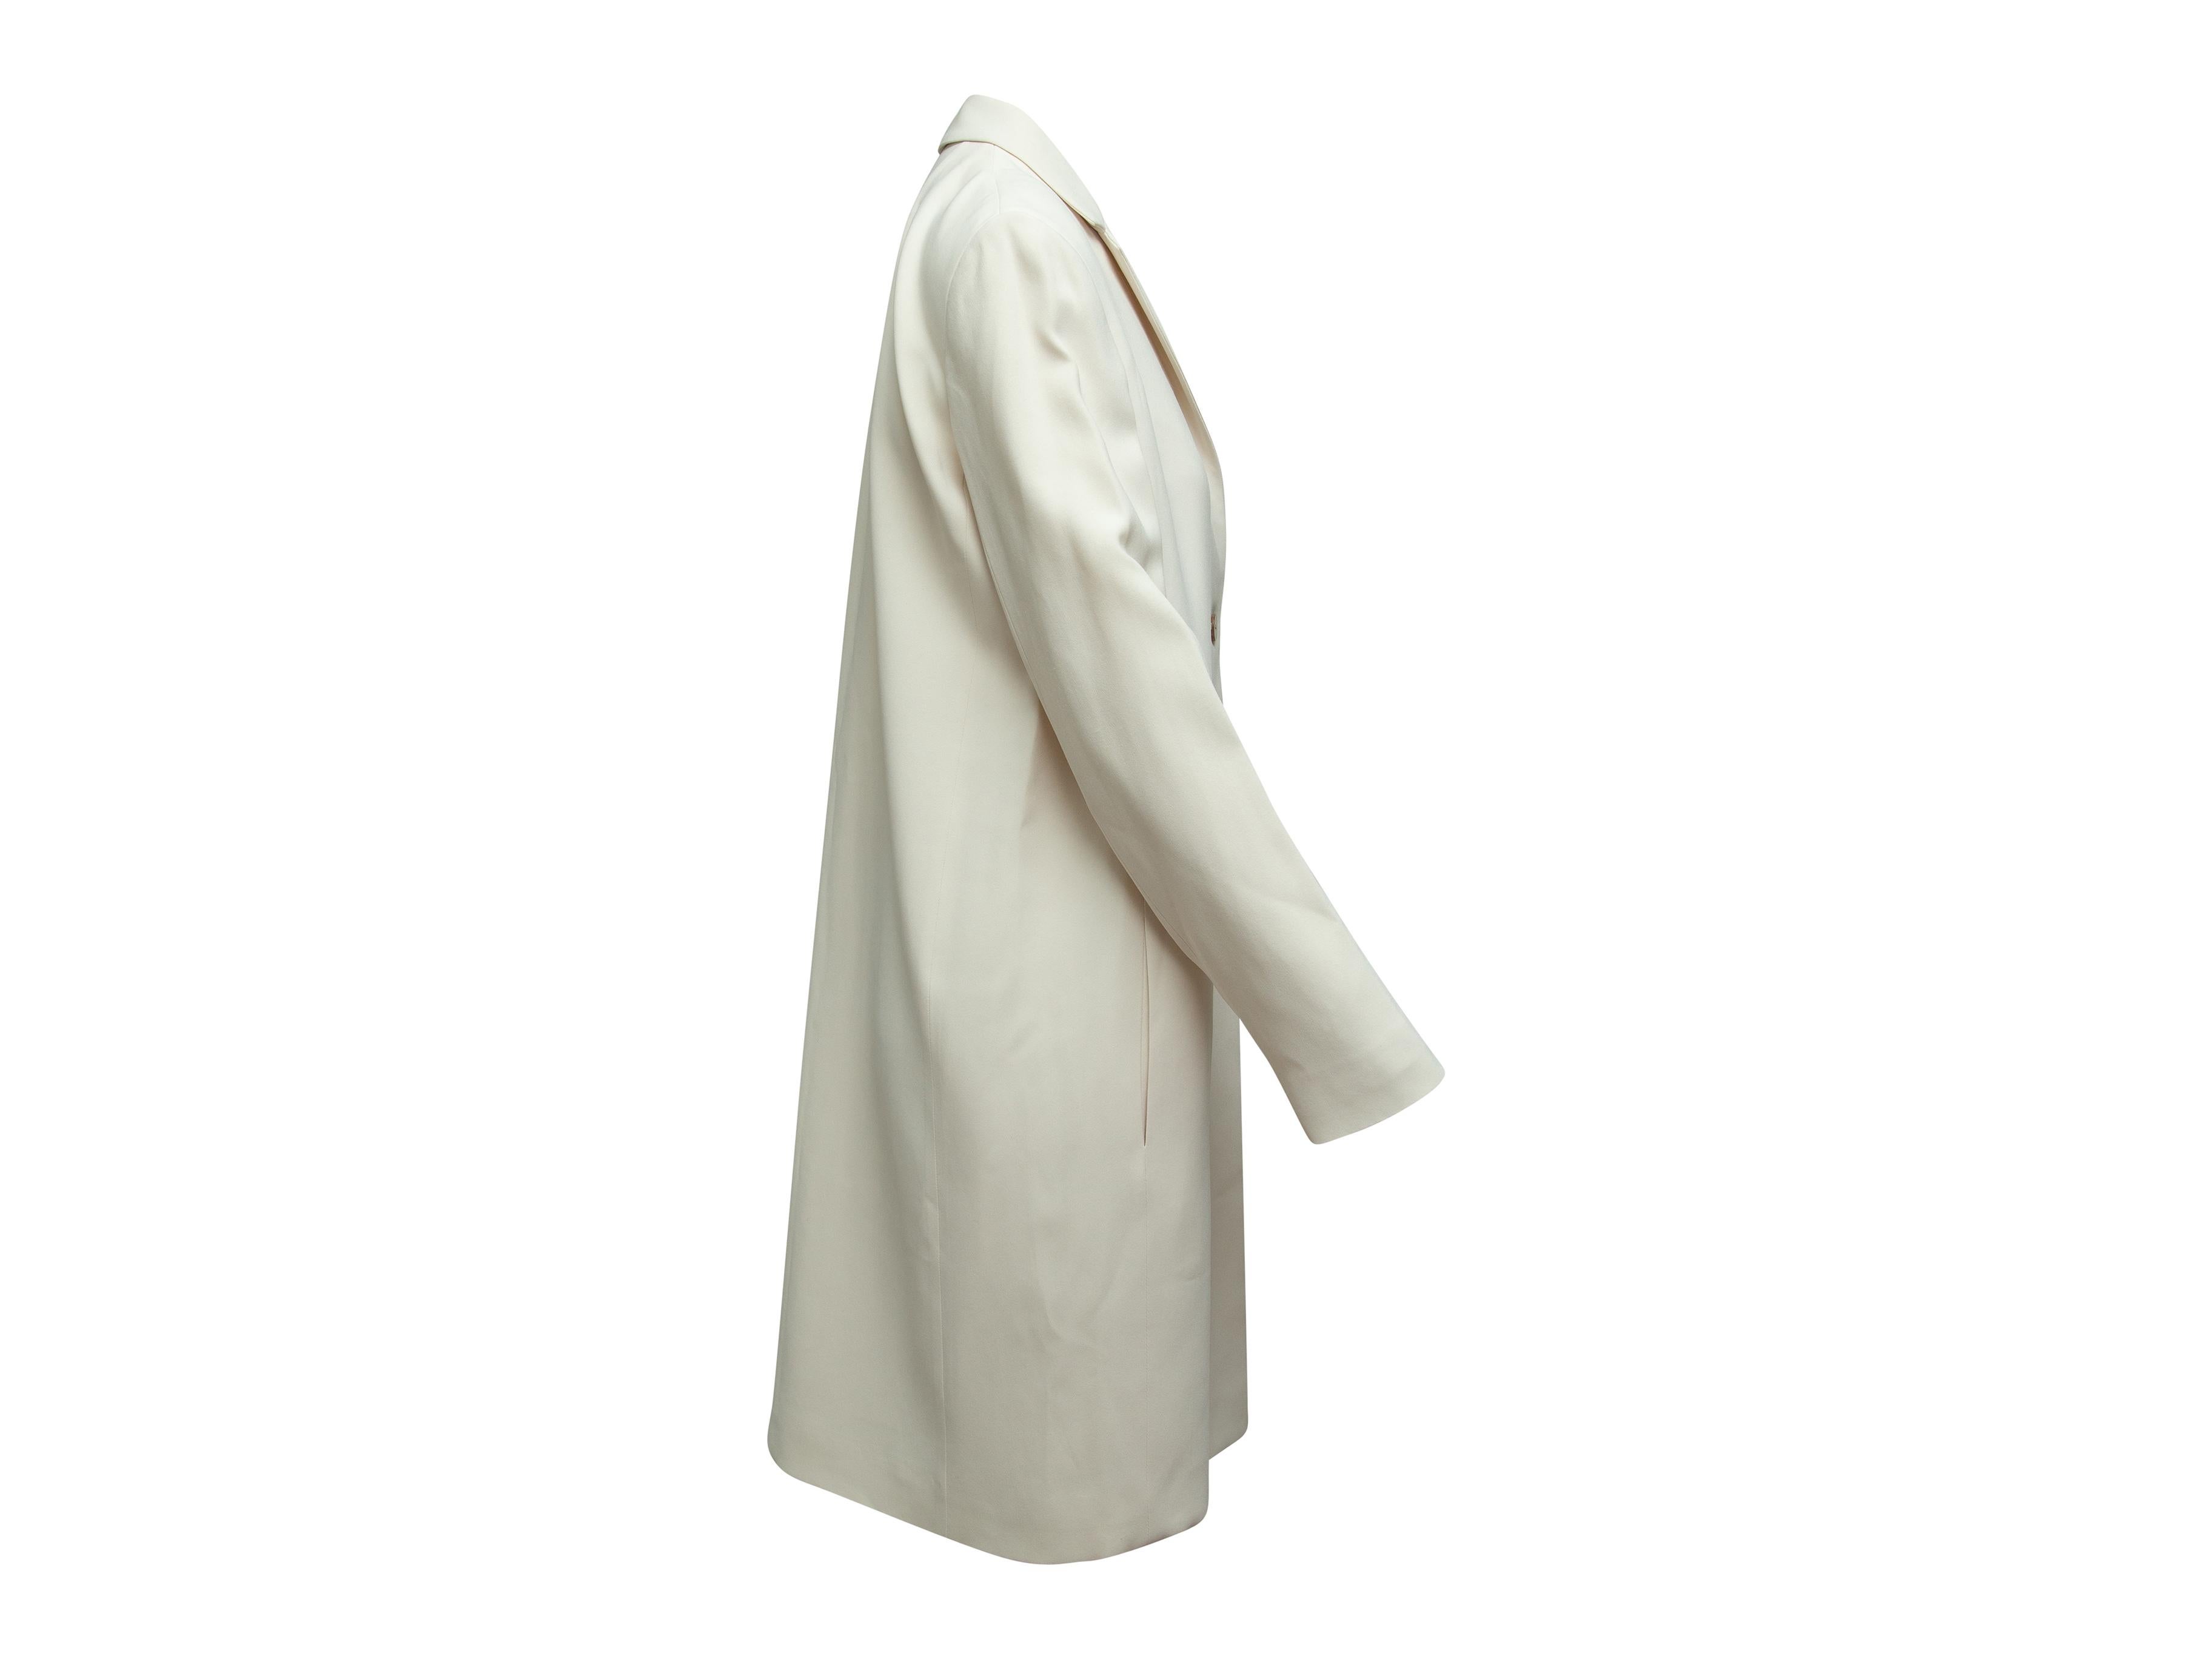 Product details: Cream long collared coat by The Row. Notch lapel. Dual slit pockets at hips. Horn button closures at center front. 42